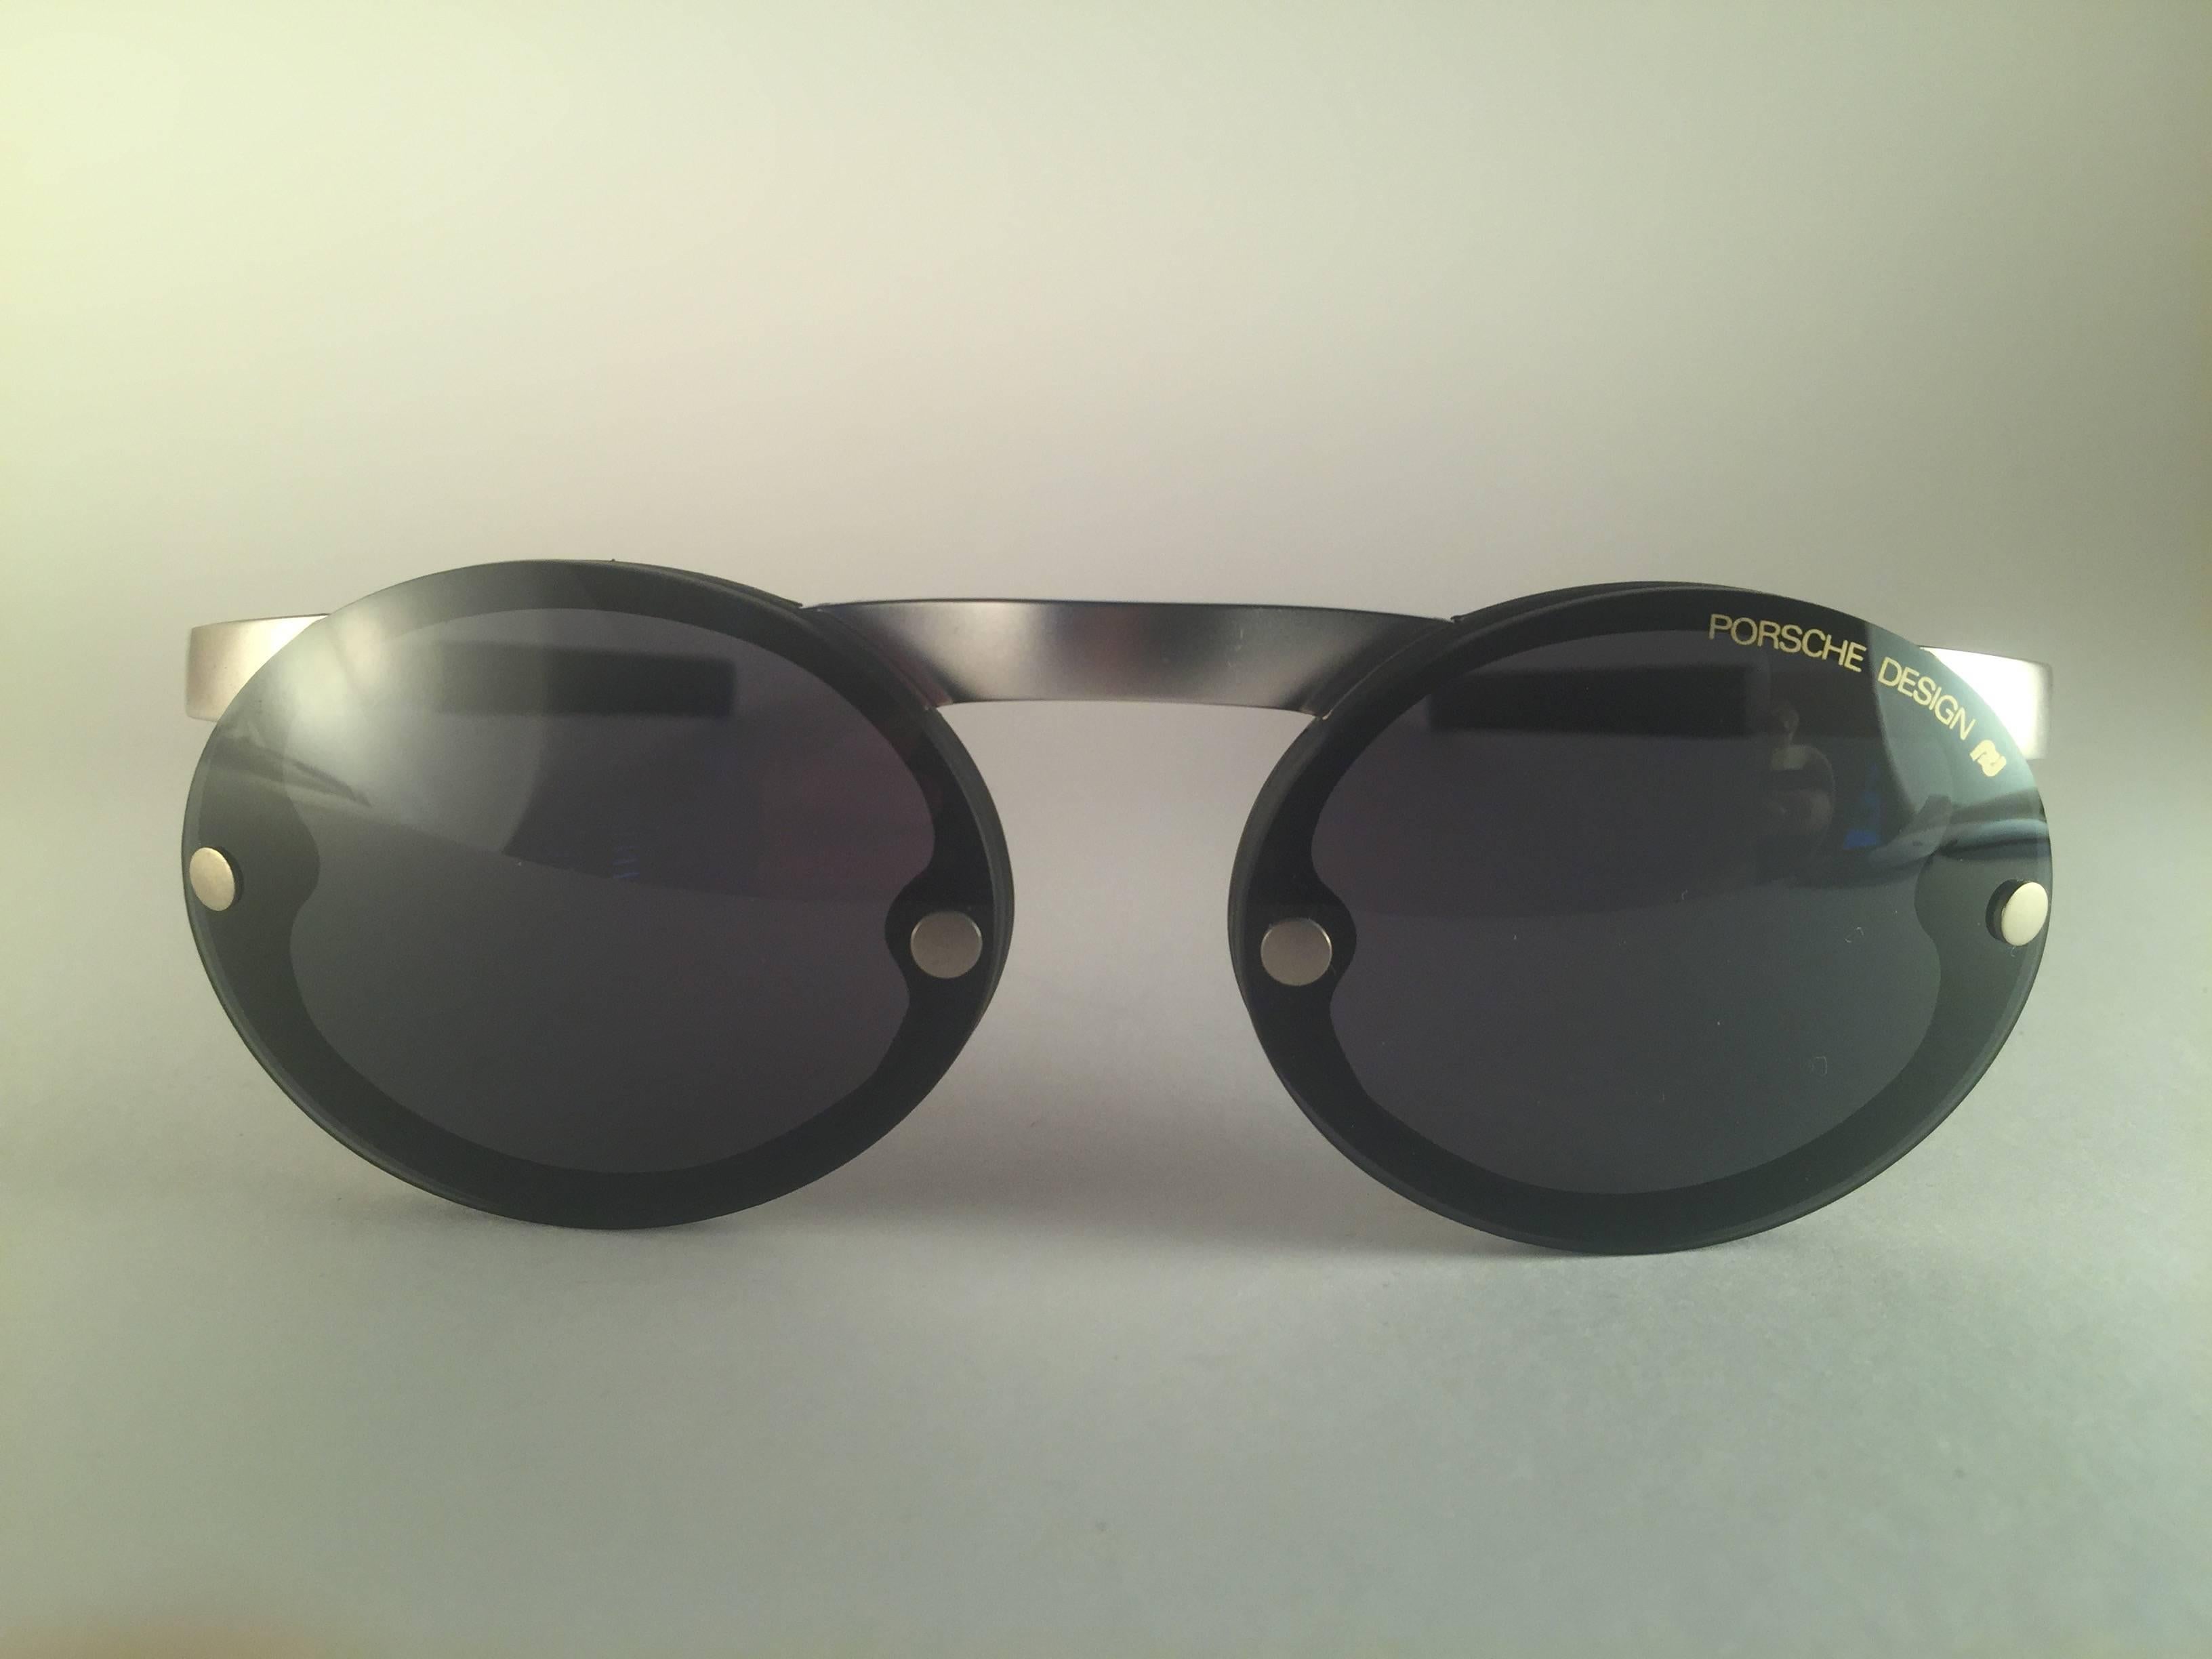 New 1980's Porsche Design 5694 Silver Matte frame. 
Amazing craftsmanship and quality.  
Comes with the original black Porsche hard case thats has some wear on it due to nearly 40 years of storage.  
New, never worn. Made in Austria.